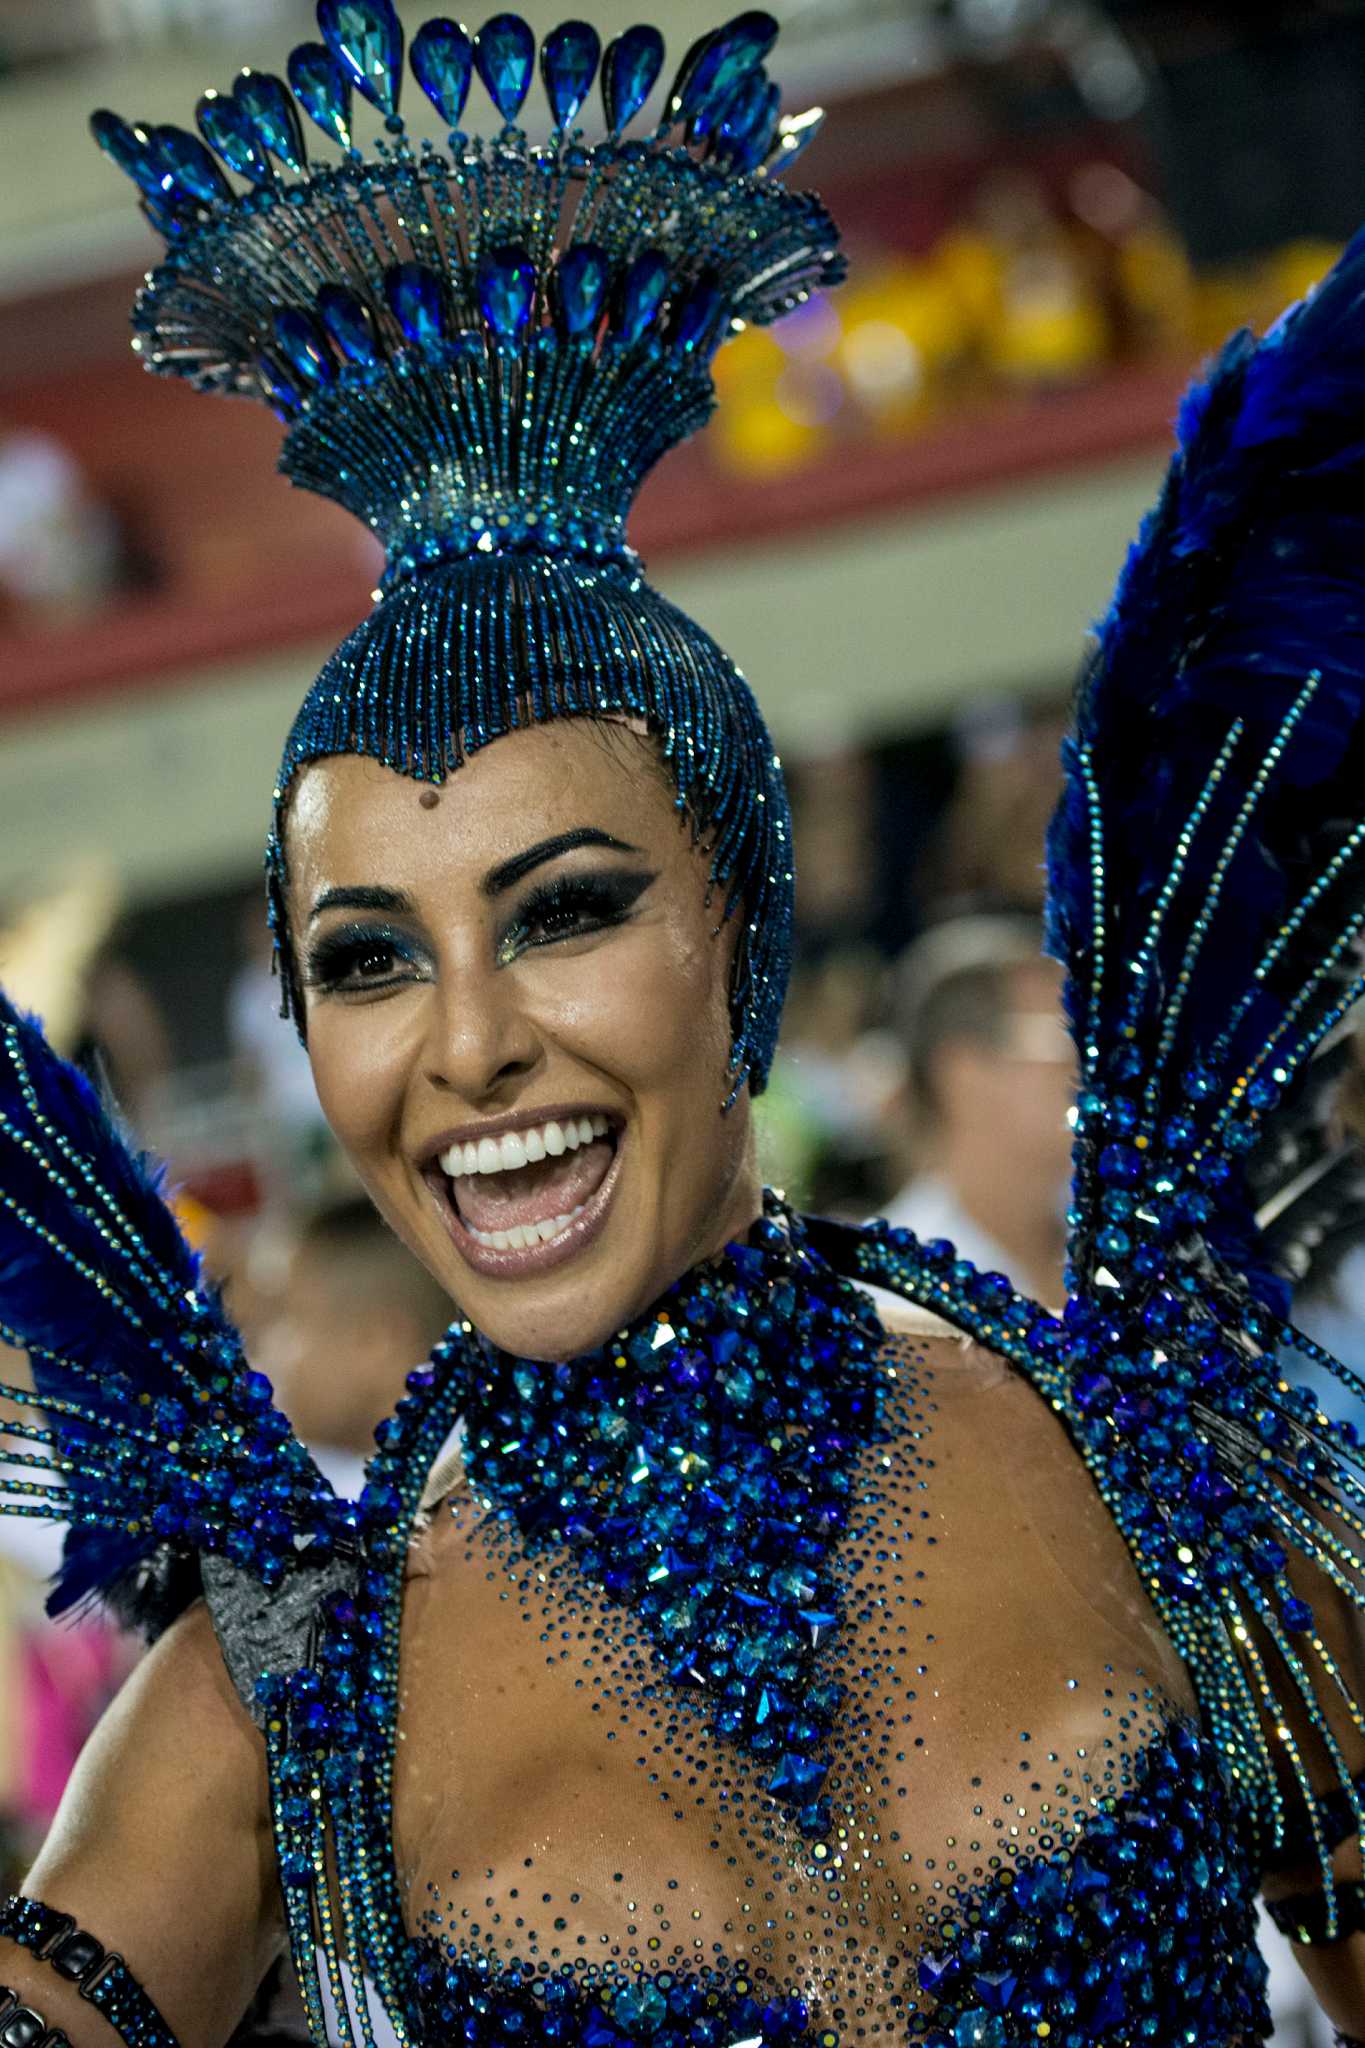 Wild Frolicking Fantasy Floats Go All Night At End Of Brazils Carnival